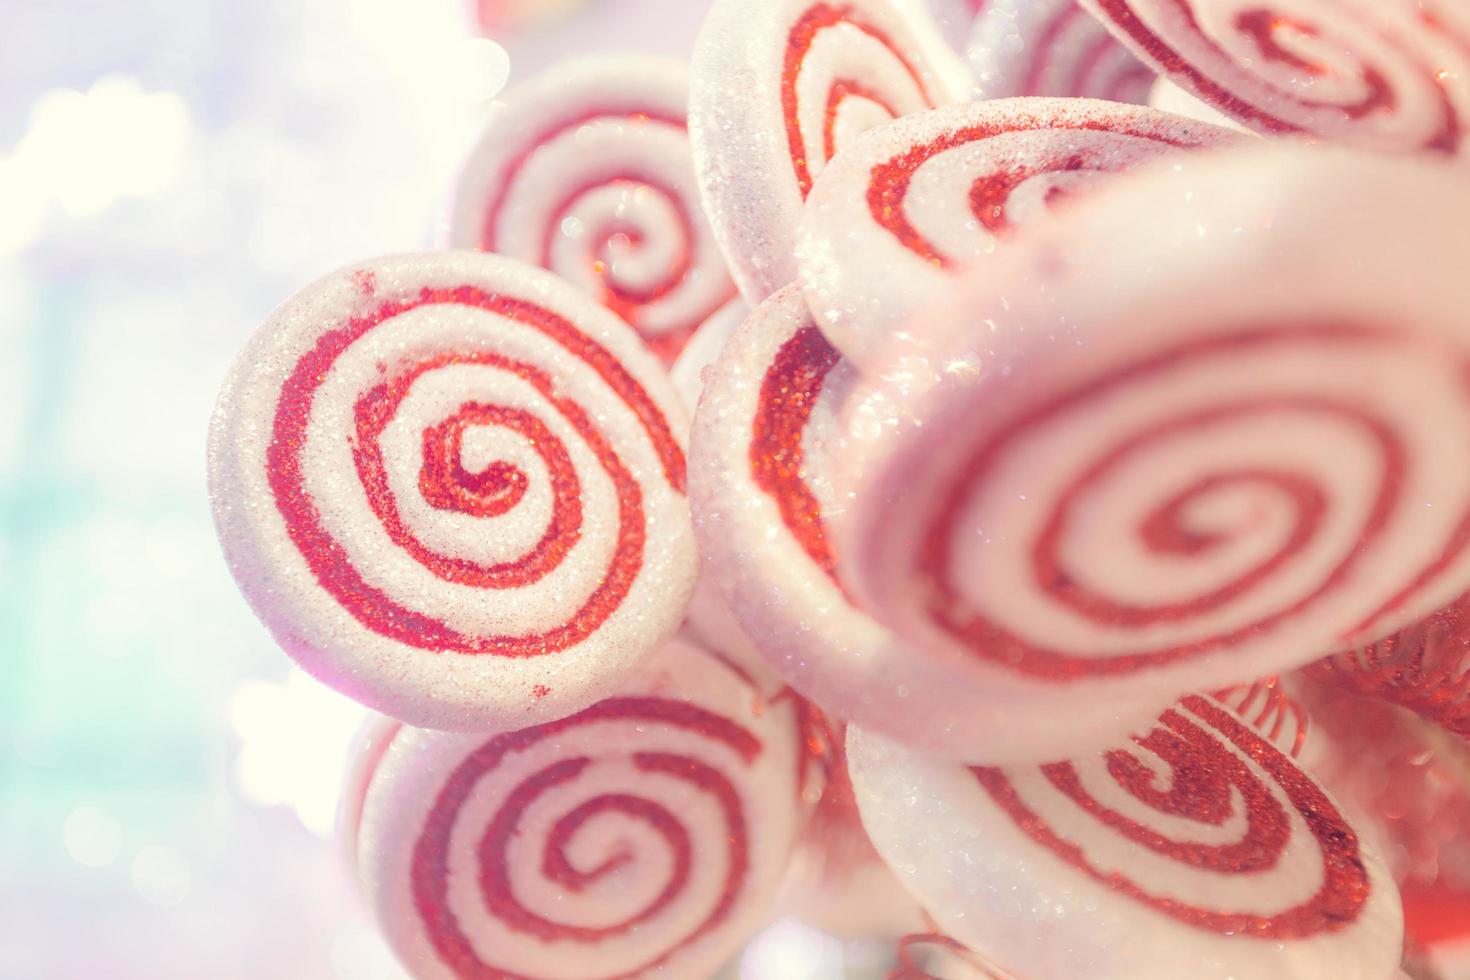 White and red candy photo